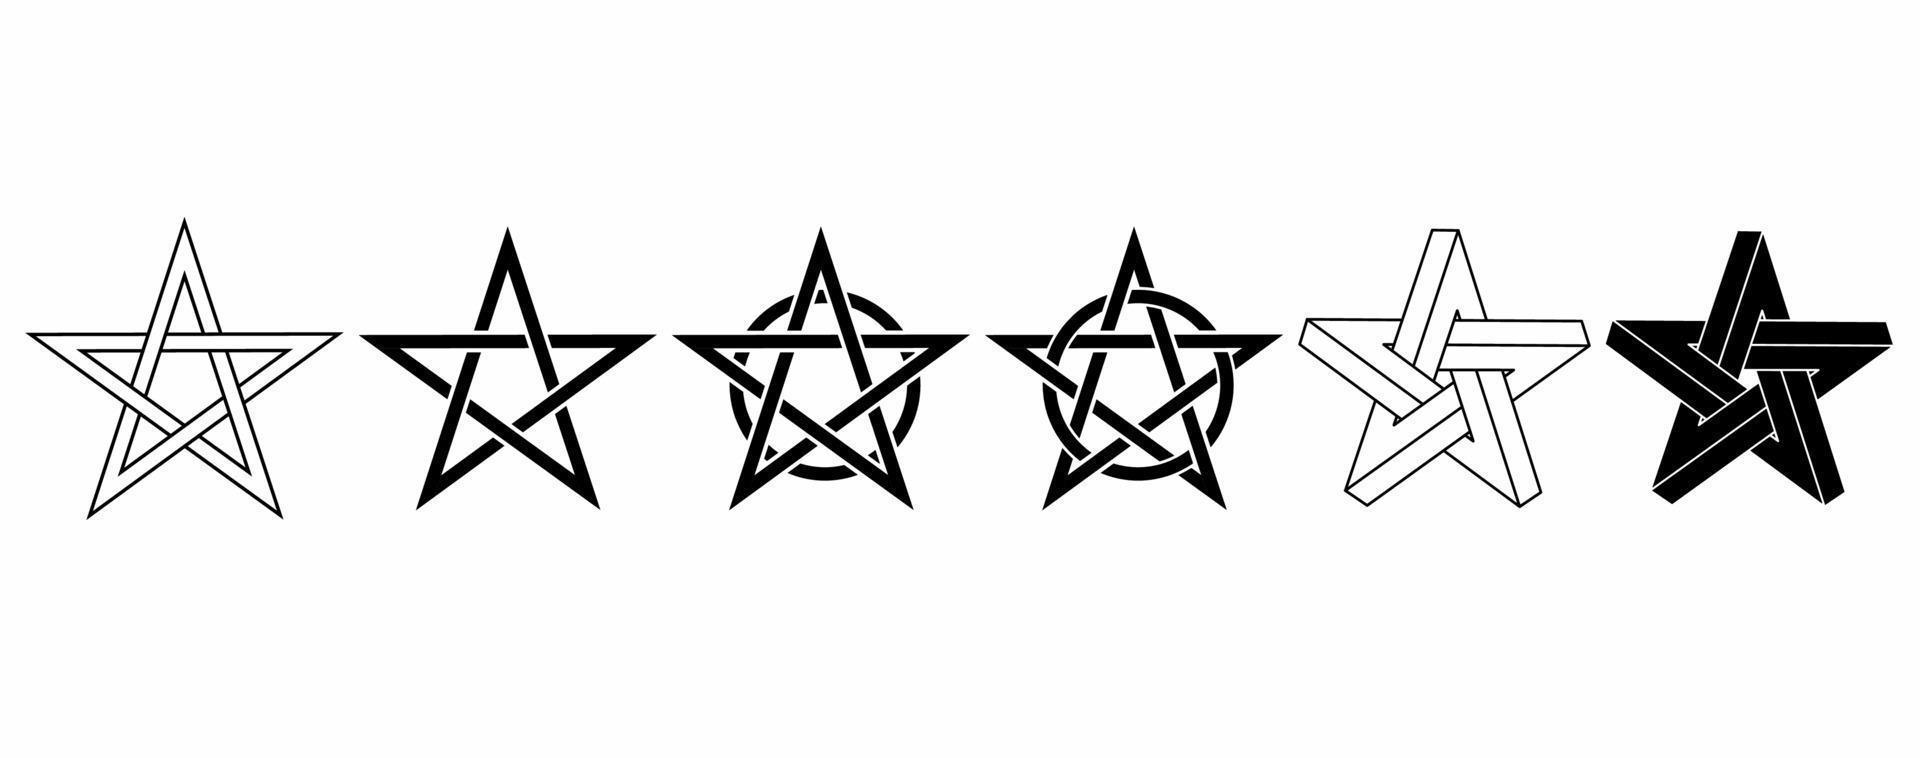 pentagram stars icon set isolated on white background, collection of pentagram stars with different style vector